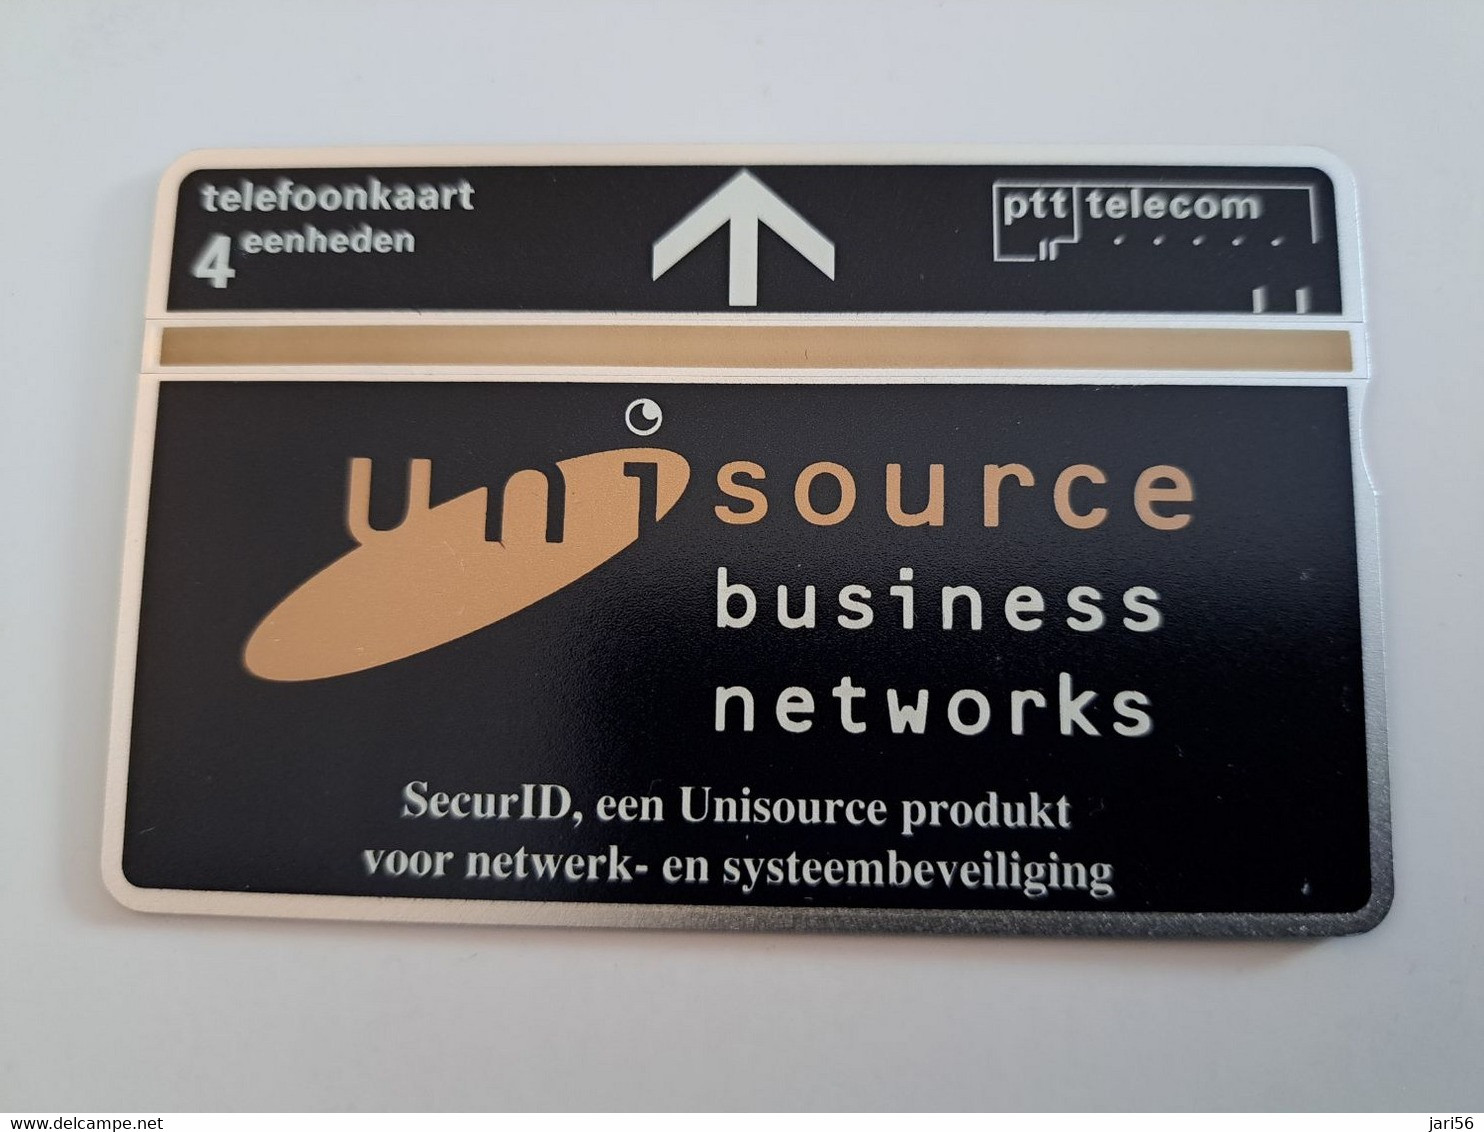 NETHERLANDS  ADVERTISING  4 UNITS/ INTERSOURCE BUSINESS NETWORKS    / NO; R082  LANDYS & GYR   Mint  ** 11768** - Private